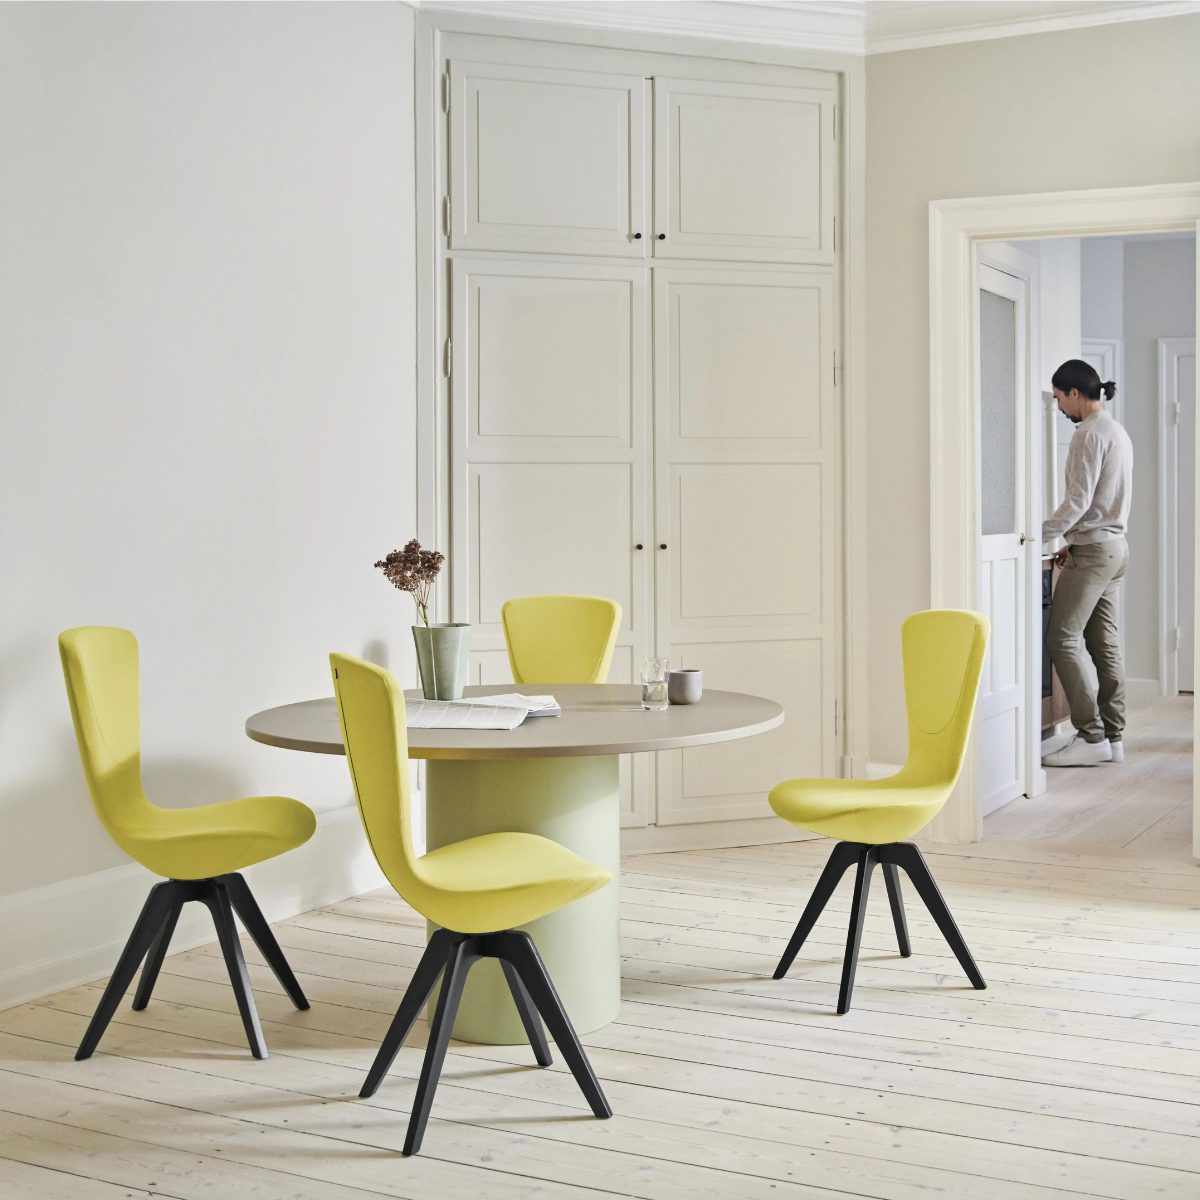 invite chair by varier - in a kitchen 